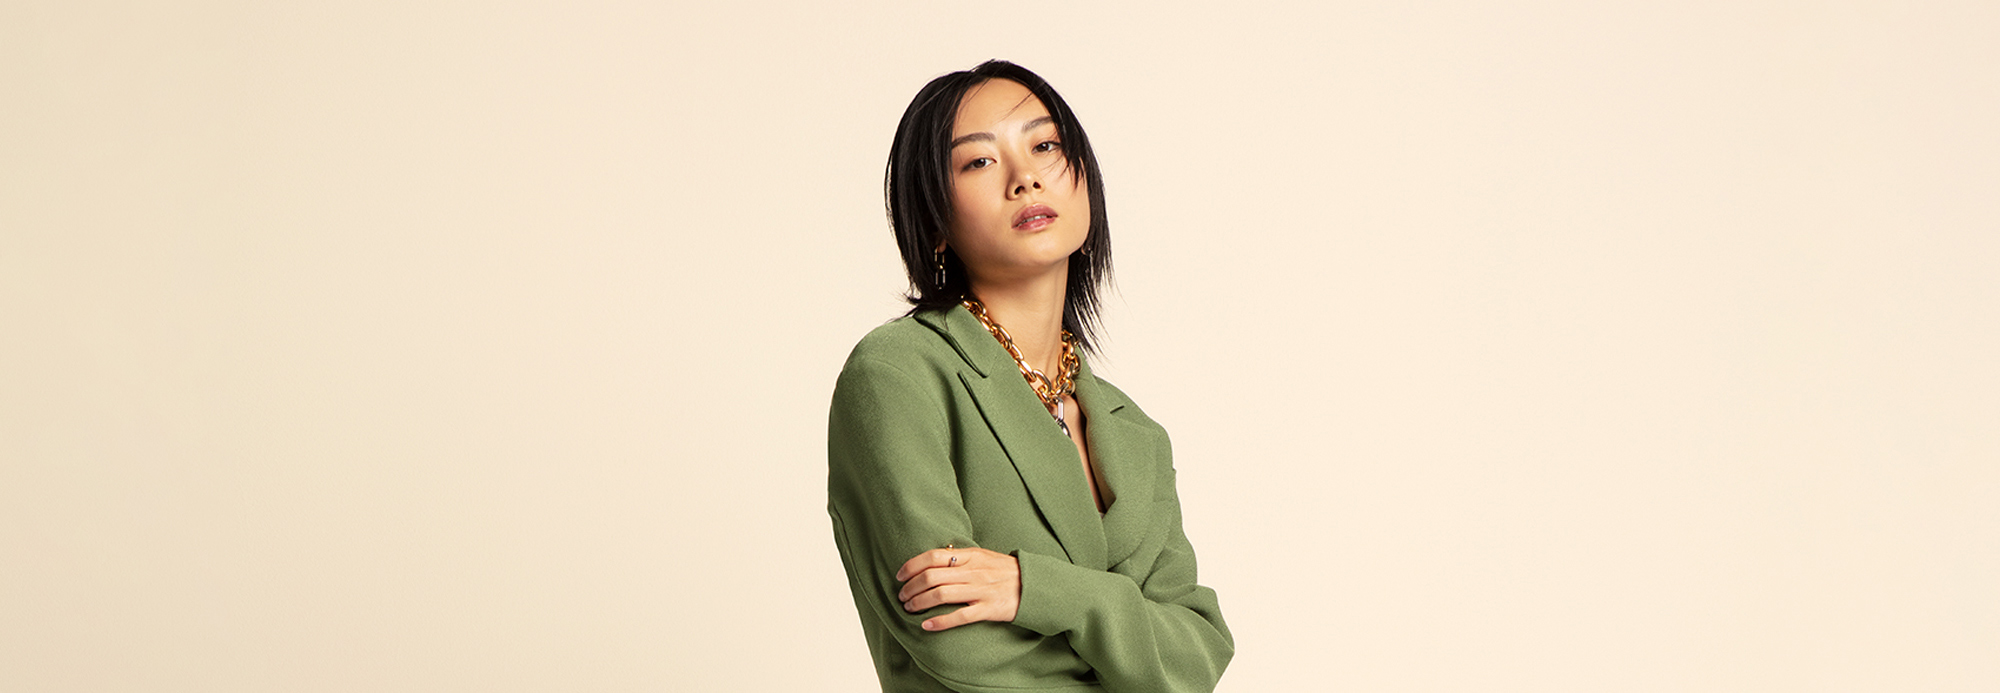 A woman wearing a green blazer and statement necklace